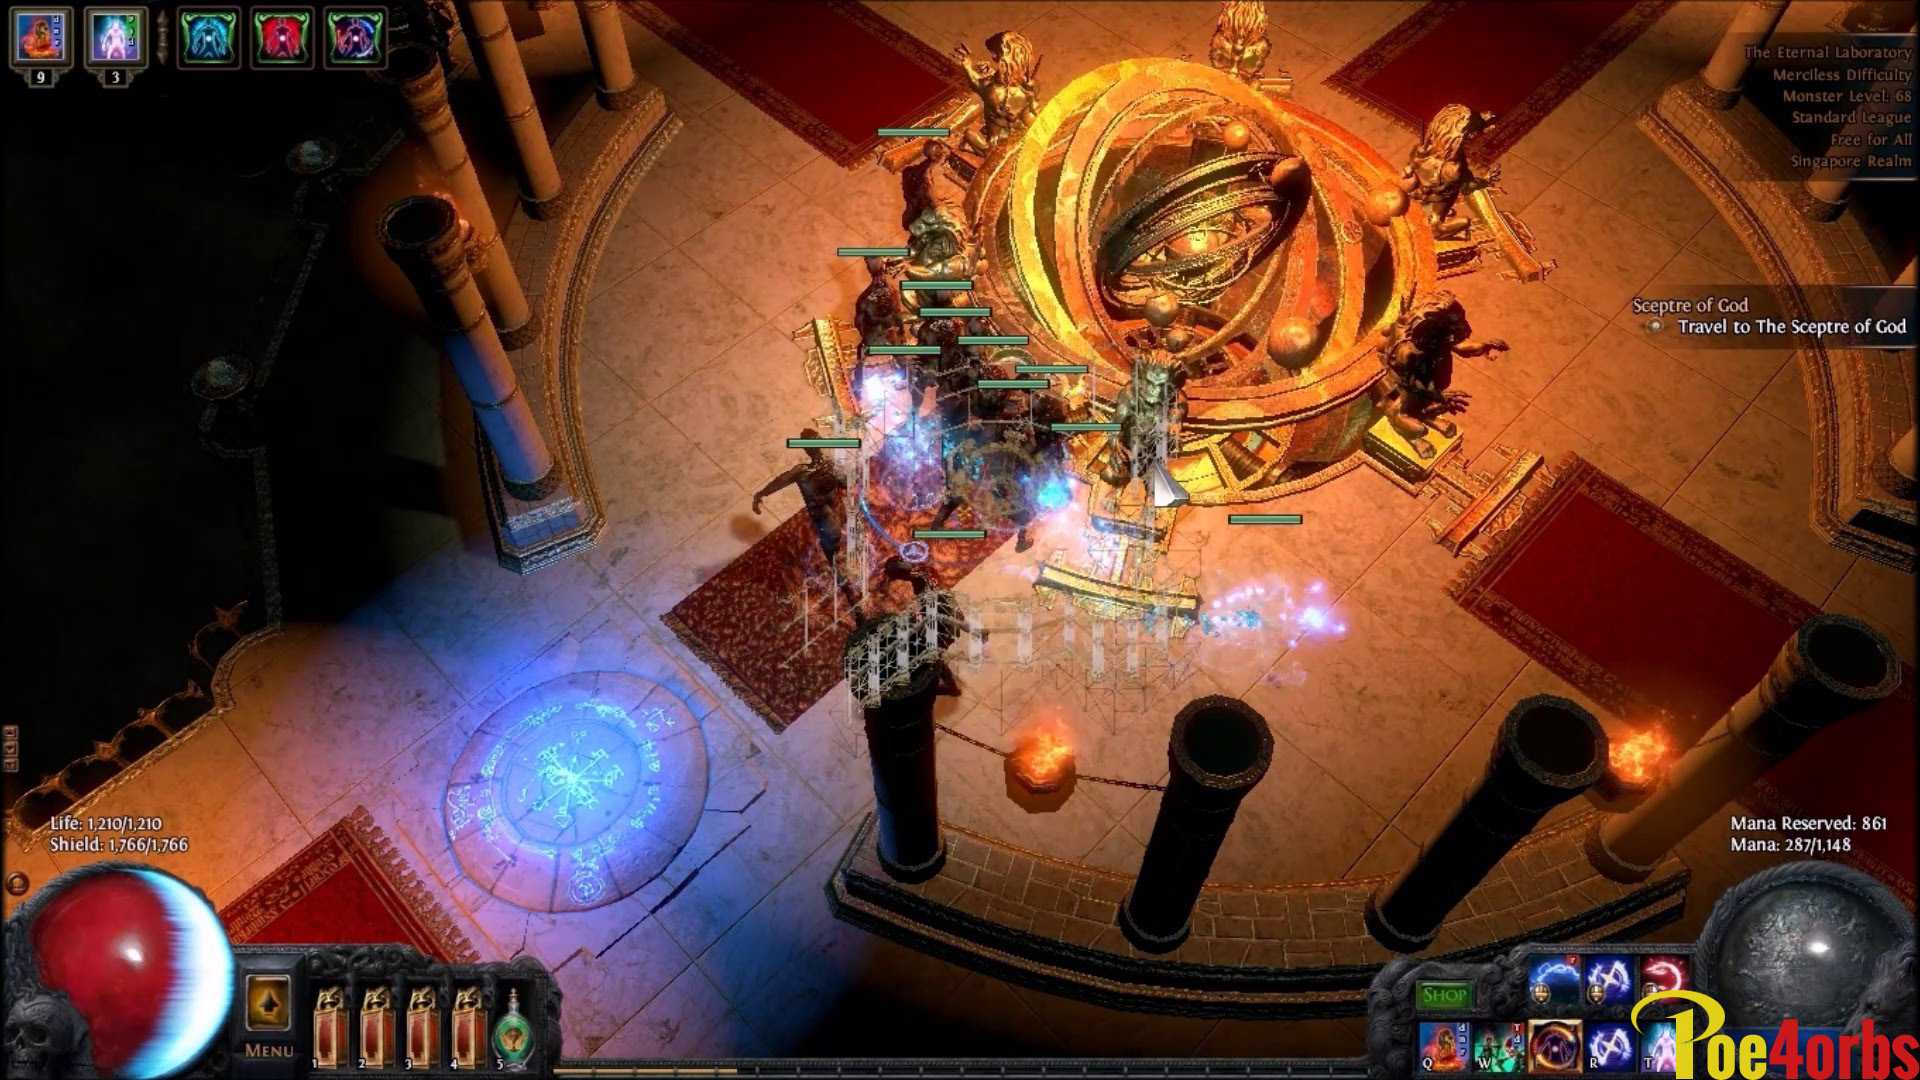 New Path of Exile players will be unable to drop eternals to compete